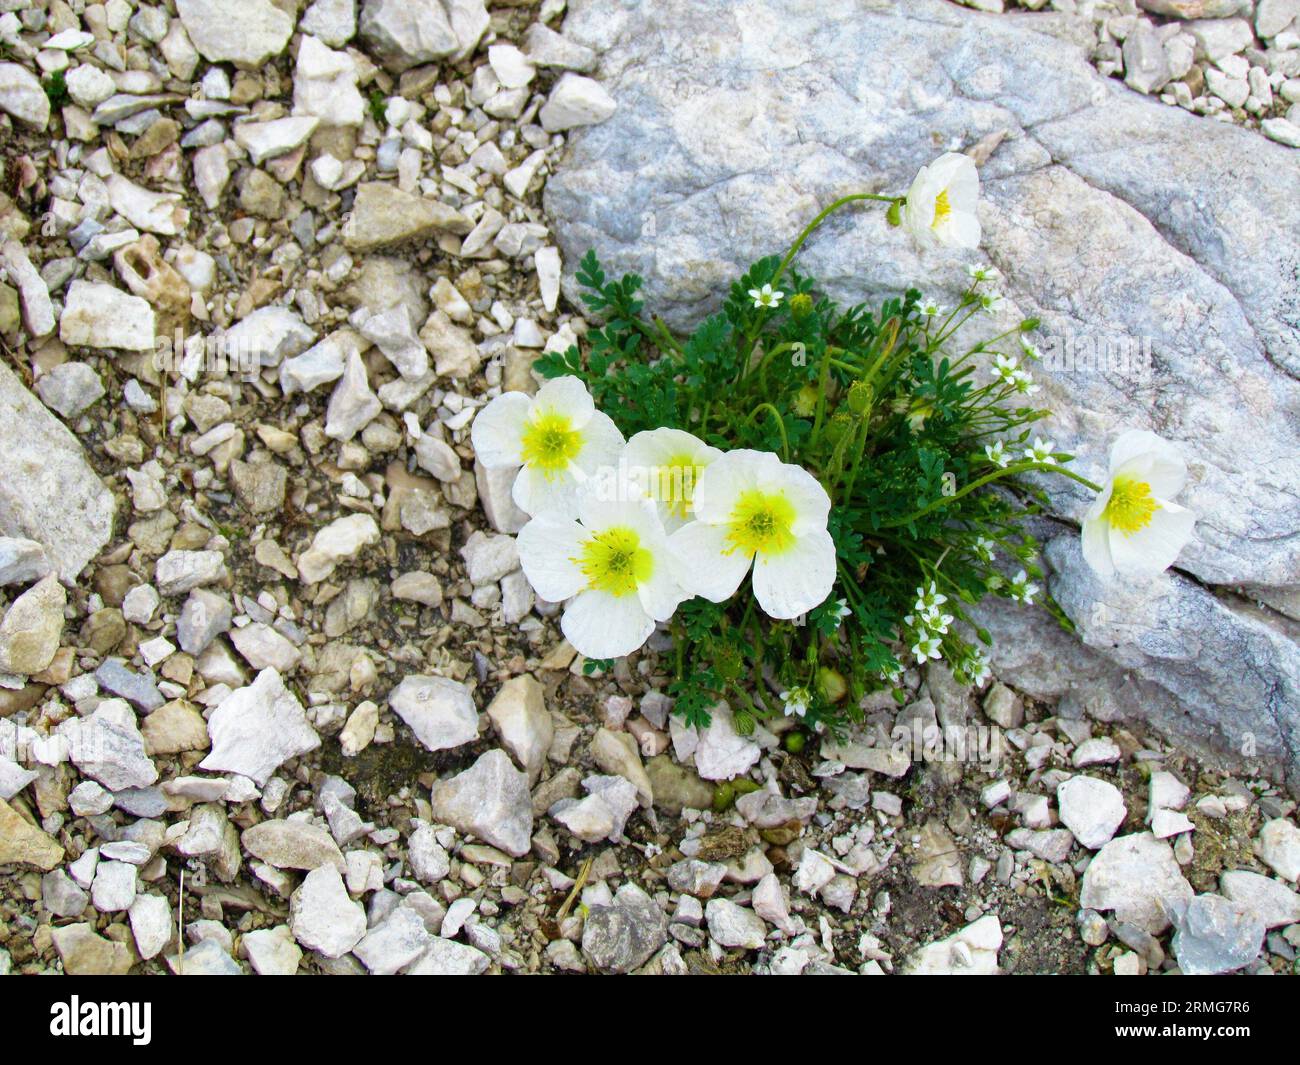 White alpine poppy or dwarf poppy (Papaver alpinum) with yellow centre growing on a rocky terrain in Triglav national park and Julian alps, Slovenia Stock Photo